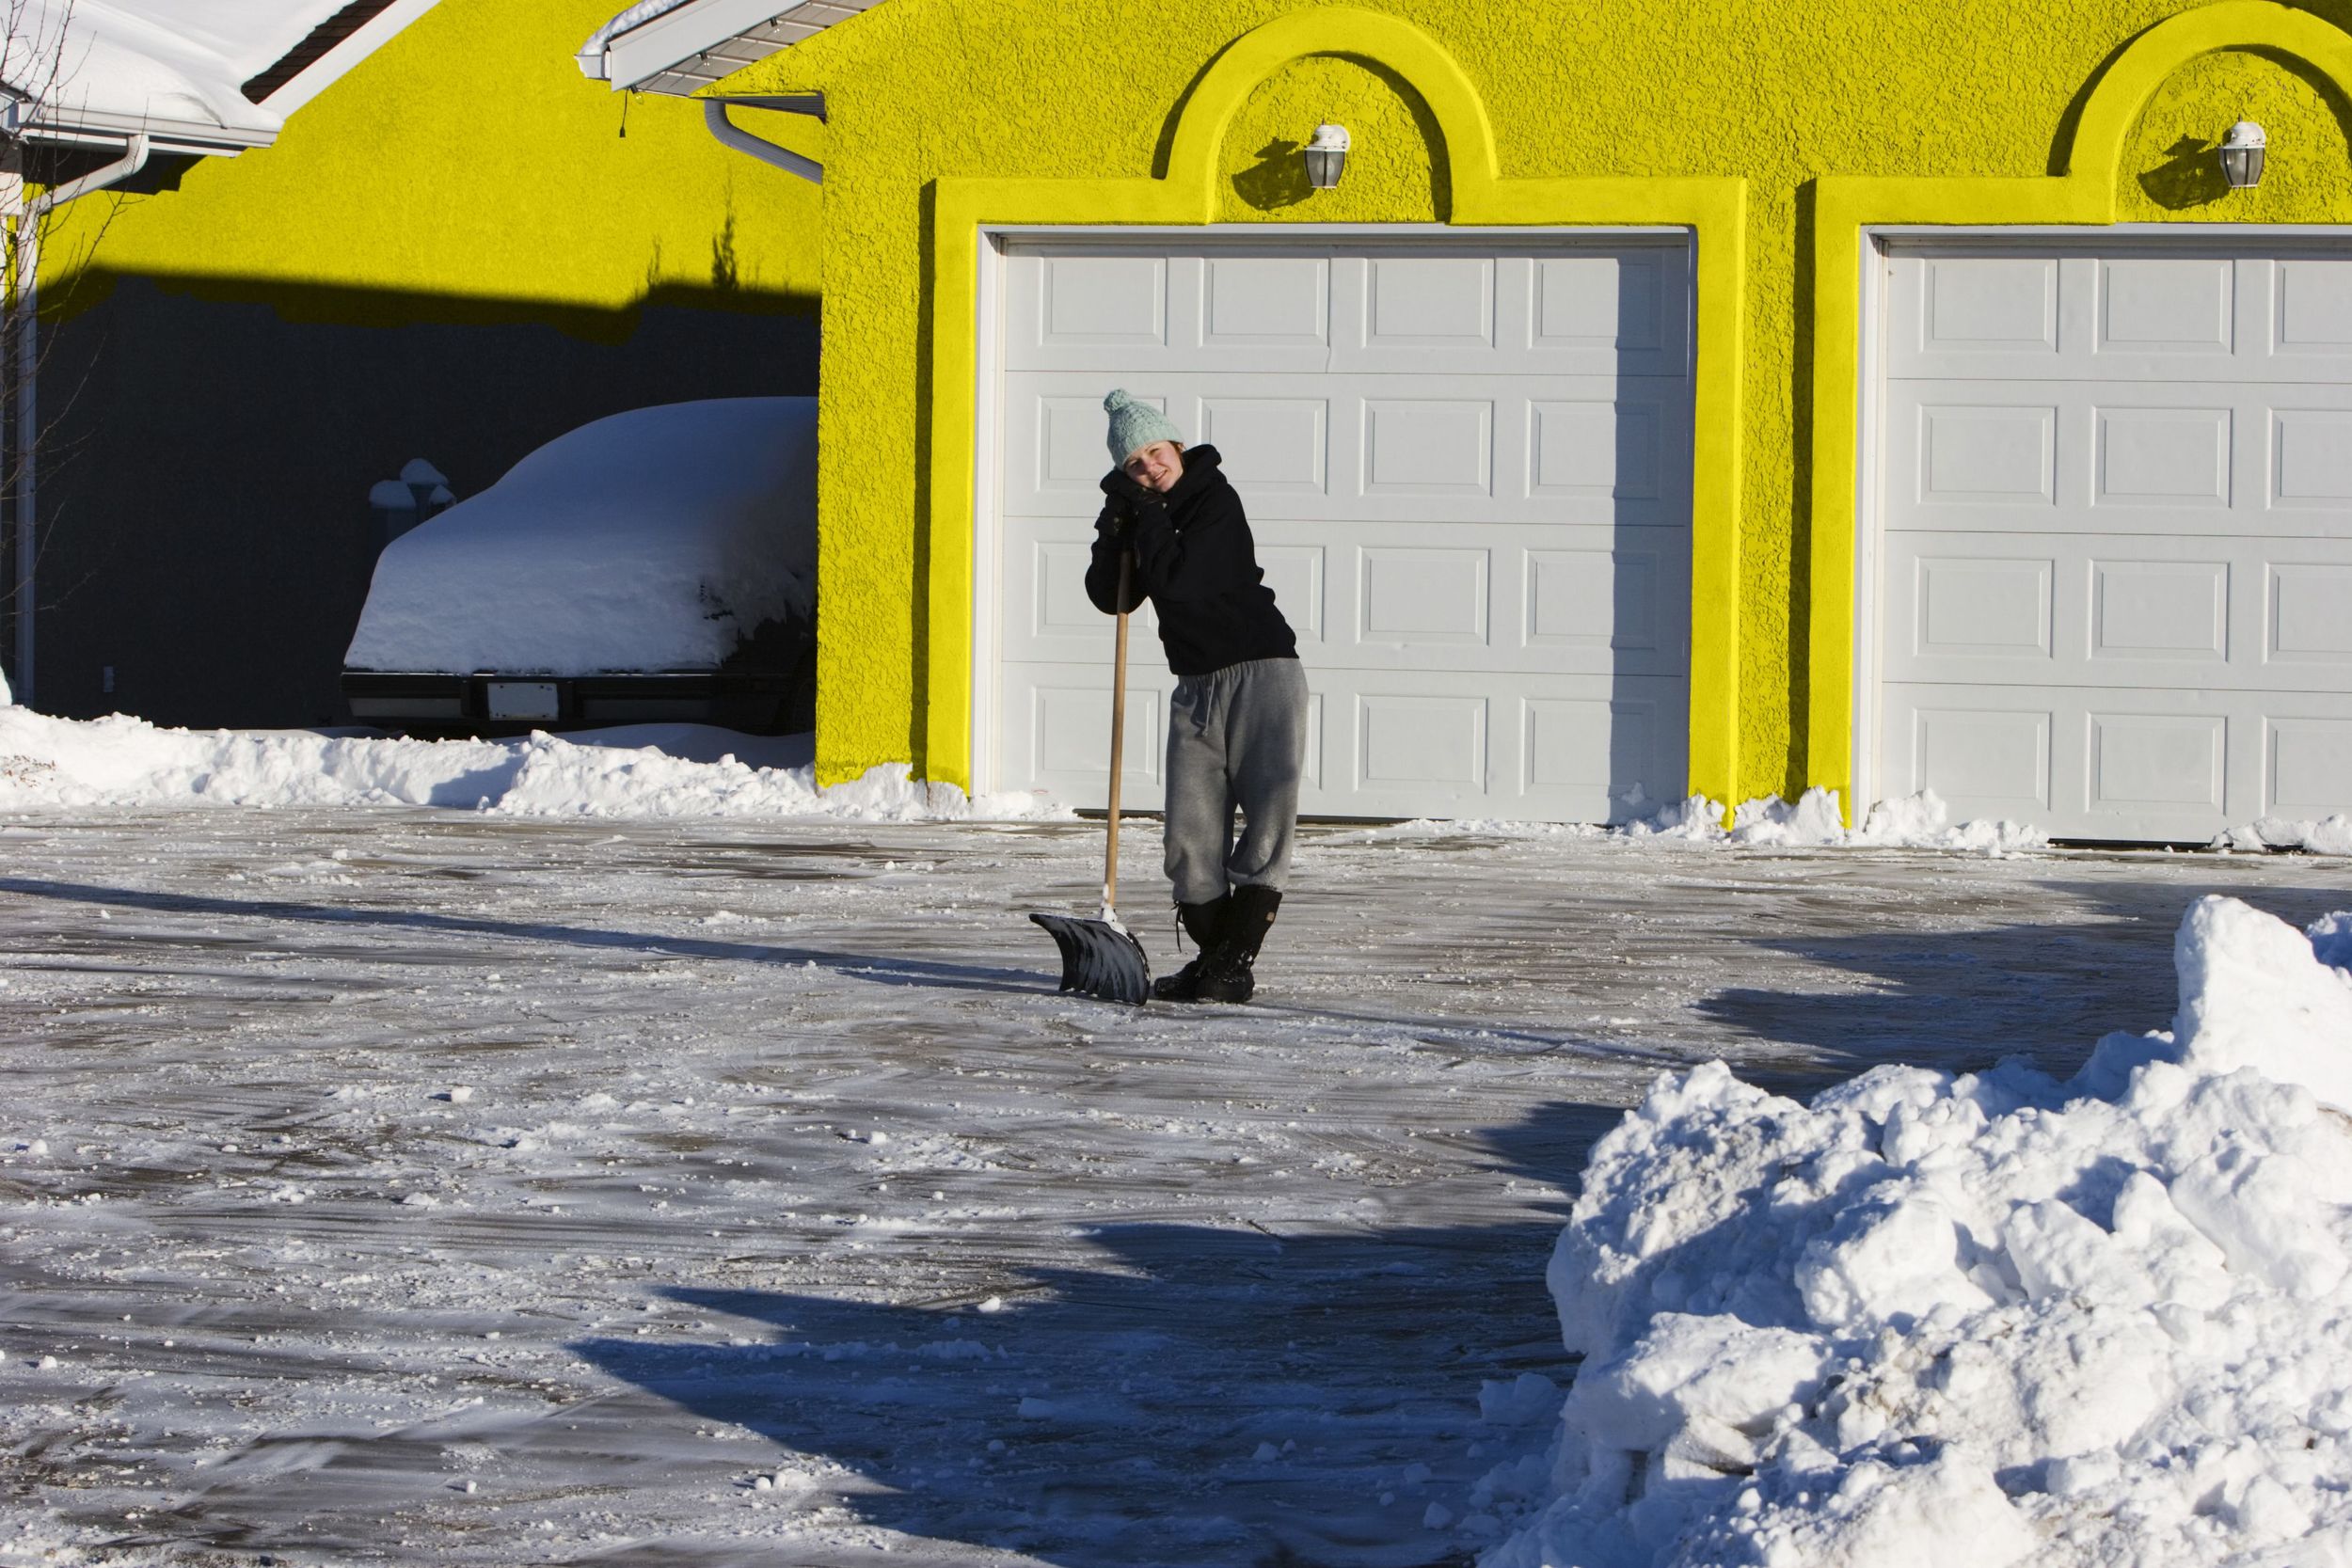   DRIVEWAY SHOVELING MADE EASY- IER    SAVING BACKS ONE HALIFAX DRIVEWAY AT A TIME   GET A QUOTE  